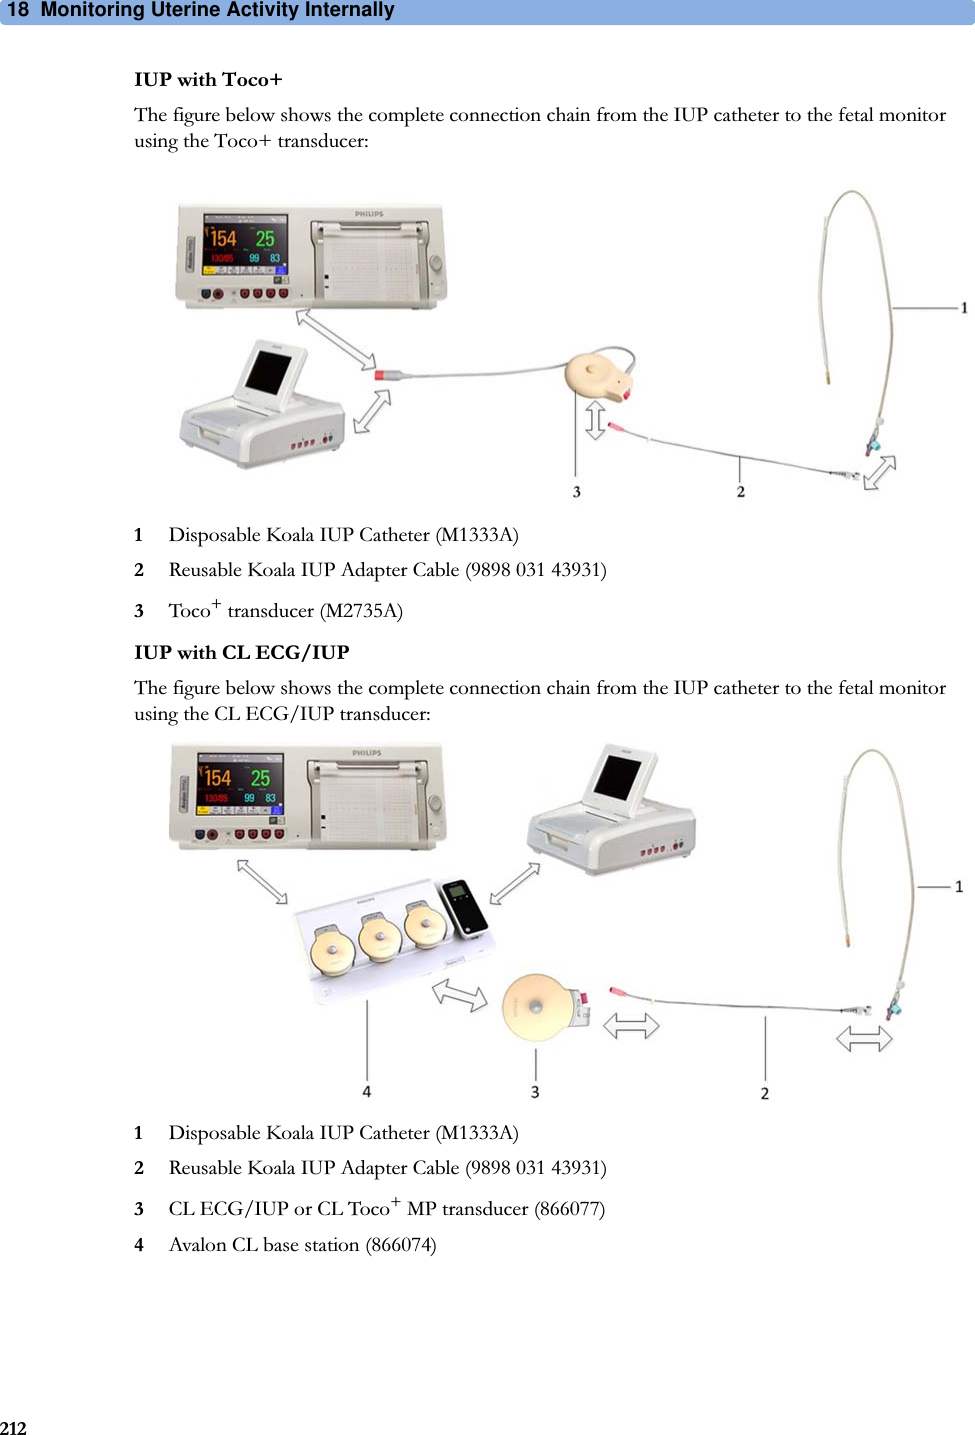 18  Monitoring Uterine Activity Internally212IUP with Toco+The figure below shows the complete connection chain from the IUP catheter to the fetal monitor using the Toco+ transducer:1Disposable Koala IUP Catheter (M1333A)2Reusable Koala IUP Adapter Cable (9898 031 43931)3Toco+ transducer (M2735A)IUP with CL ECG/IUPThe figure below shows the complete connection chain from the IUP catheter to the fetal monitor using the CL ECG/IUP transducer:1Disposable Koala IUP Catheter (M1333A)2Reusable Koala IUP Adapter Cable (9898 031 43931)3CL ECG/IUP or CL Toco+ MP transducer (866077)4Avalon CL base station (866074)